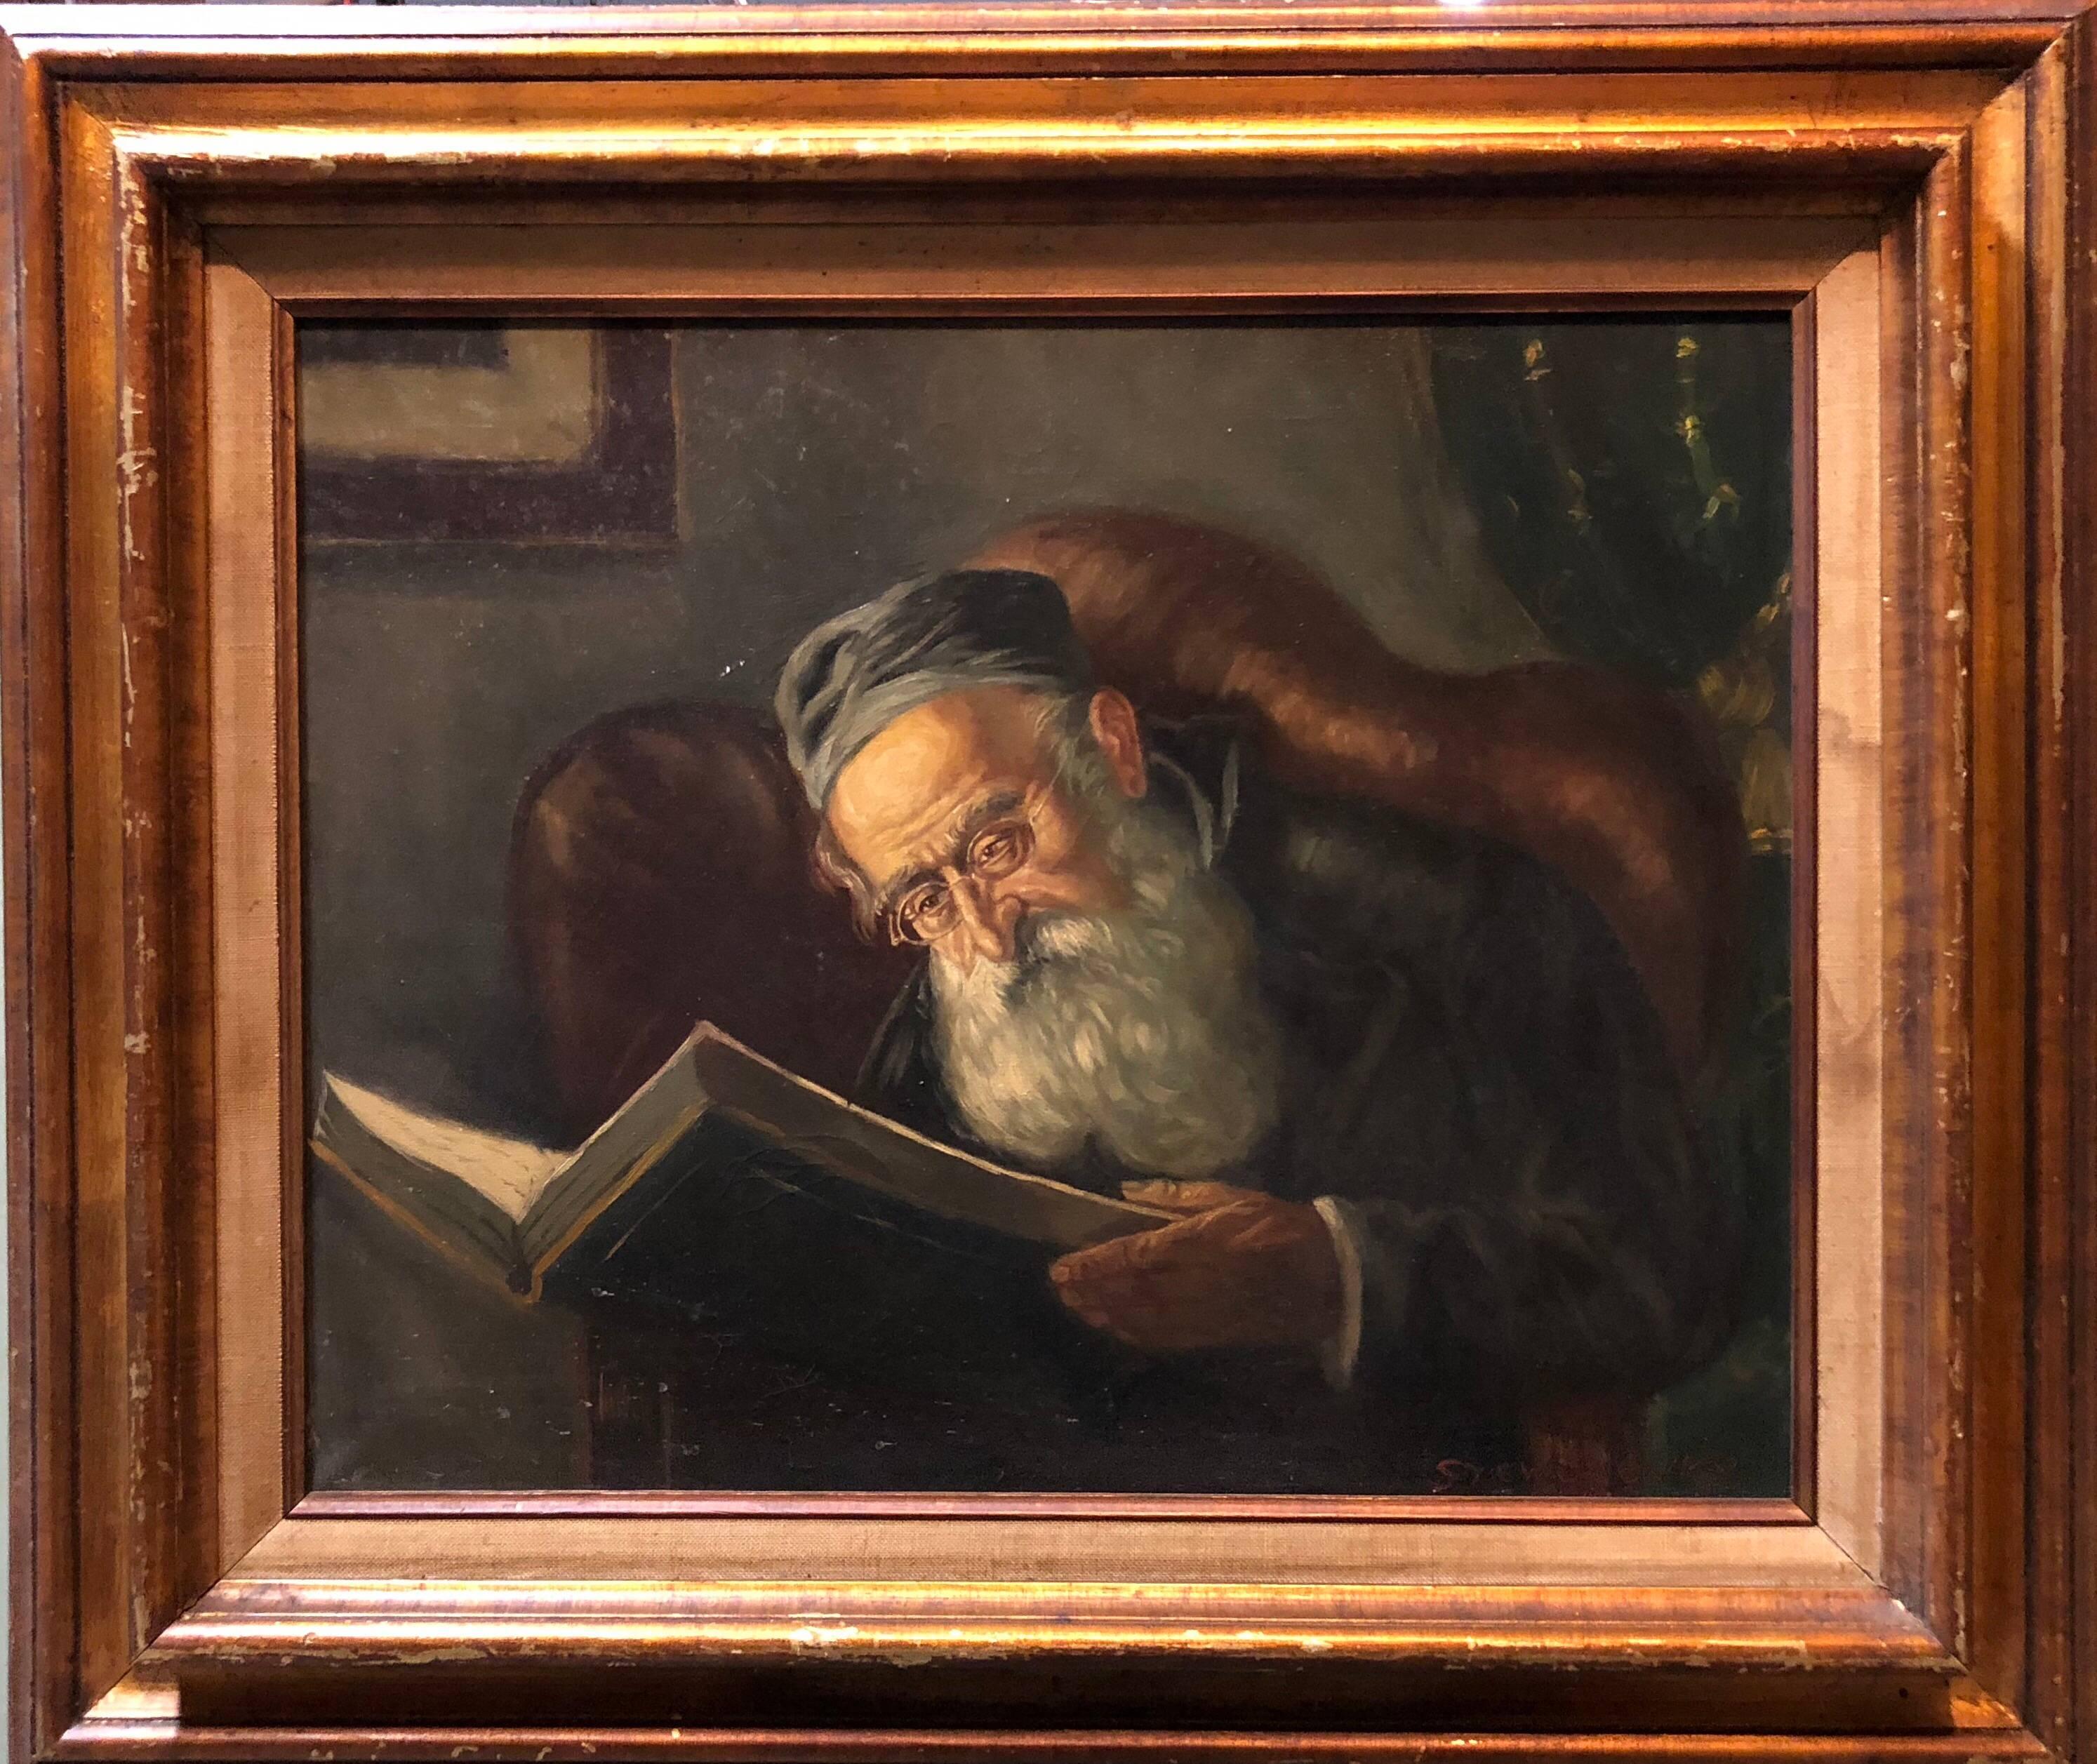 Konstanty Swewczenko (1910-1991), signed oil Judaica Oil Painting, Polish.
Konstantin Shevchenko studied at the Institute of Fine Arts in Warsaw in the years 1927 - 1928. Then, in 1932 he studied painting under the guidance of Kowarski and